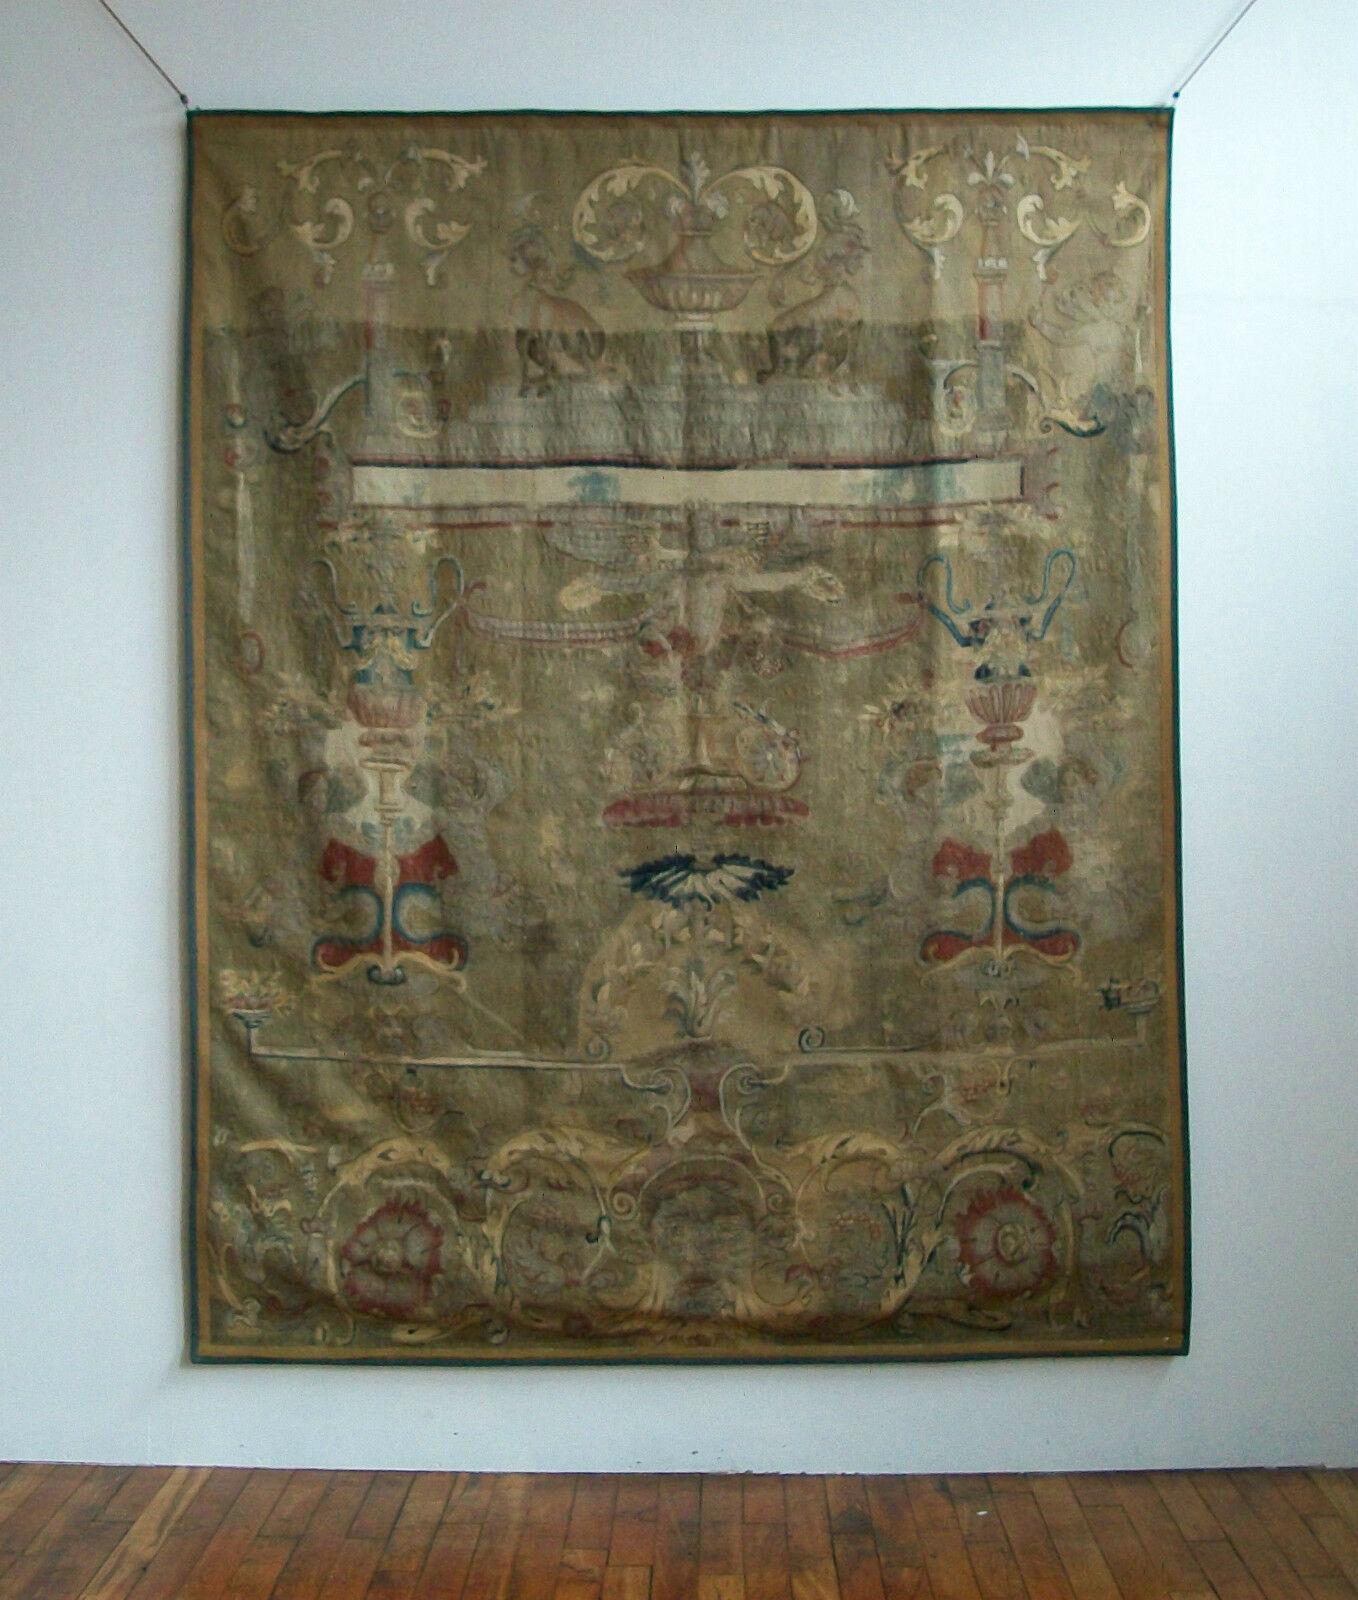 Important - 16th century - grand scale - museum quality - Renaissance period - antique Flemish finely woven grotesque tapestry panel in wool and silk - after designs by PERINO DEL VAGA (Pietro Buonaccorsi 1501–1547) - likely woven from/after the